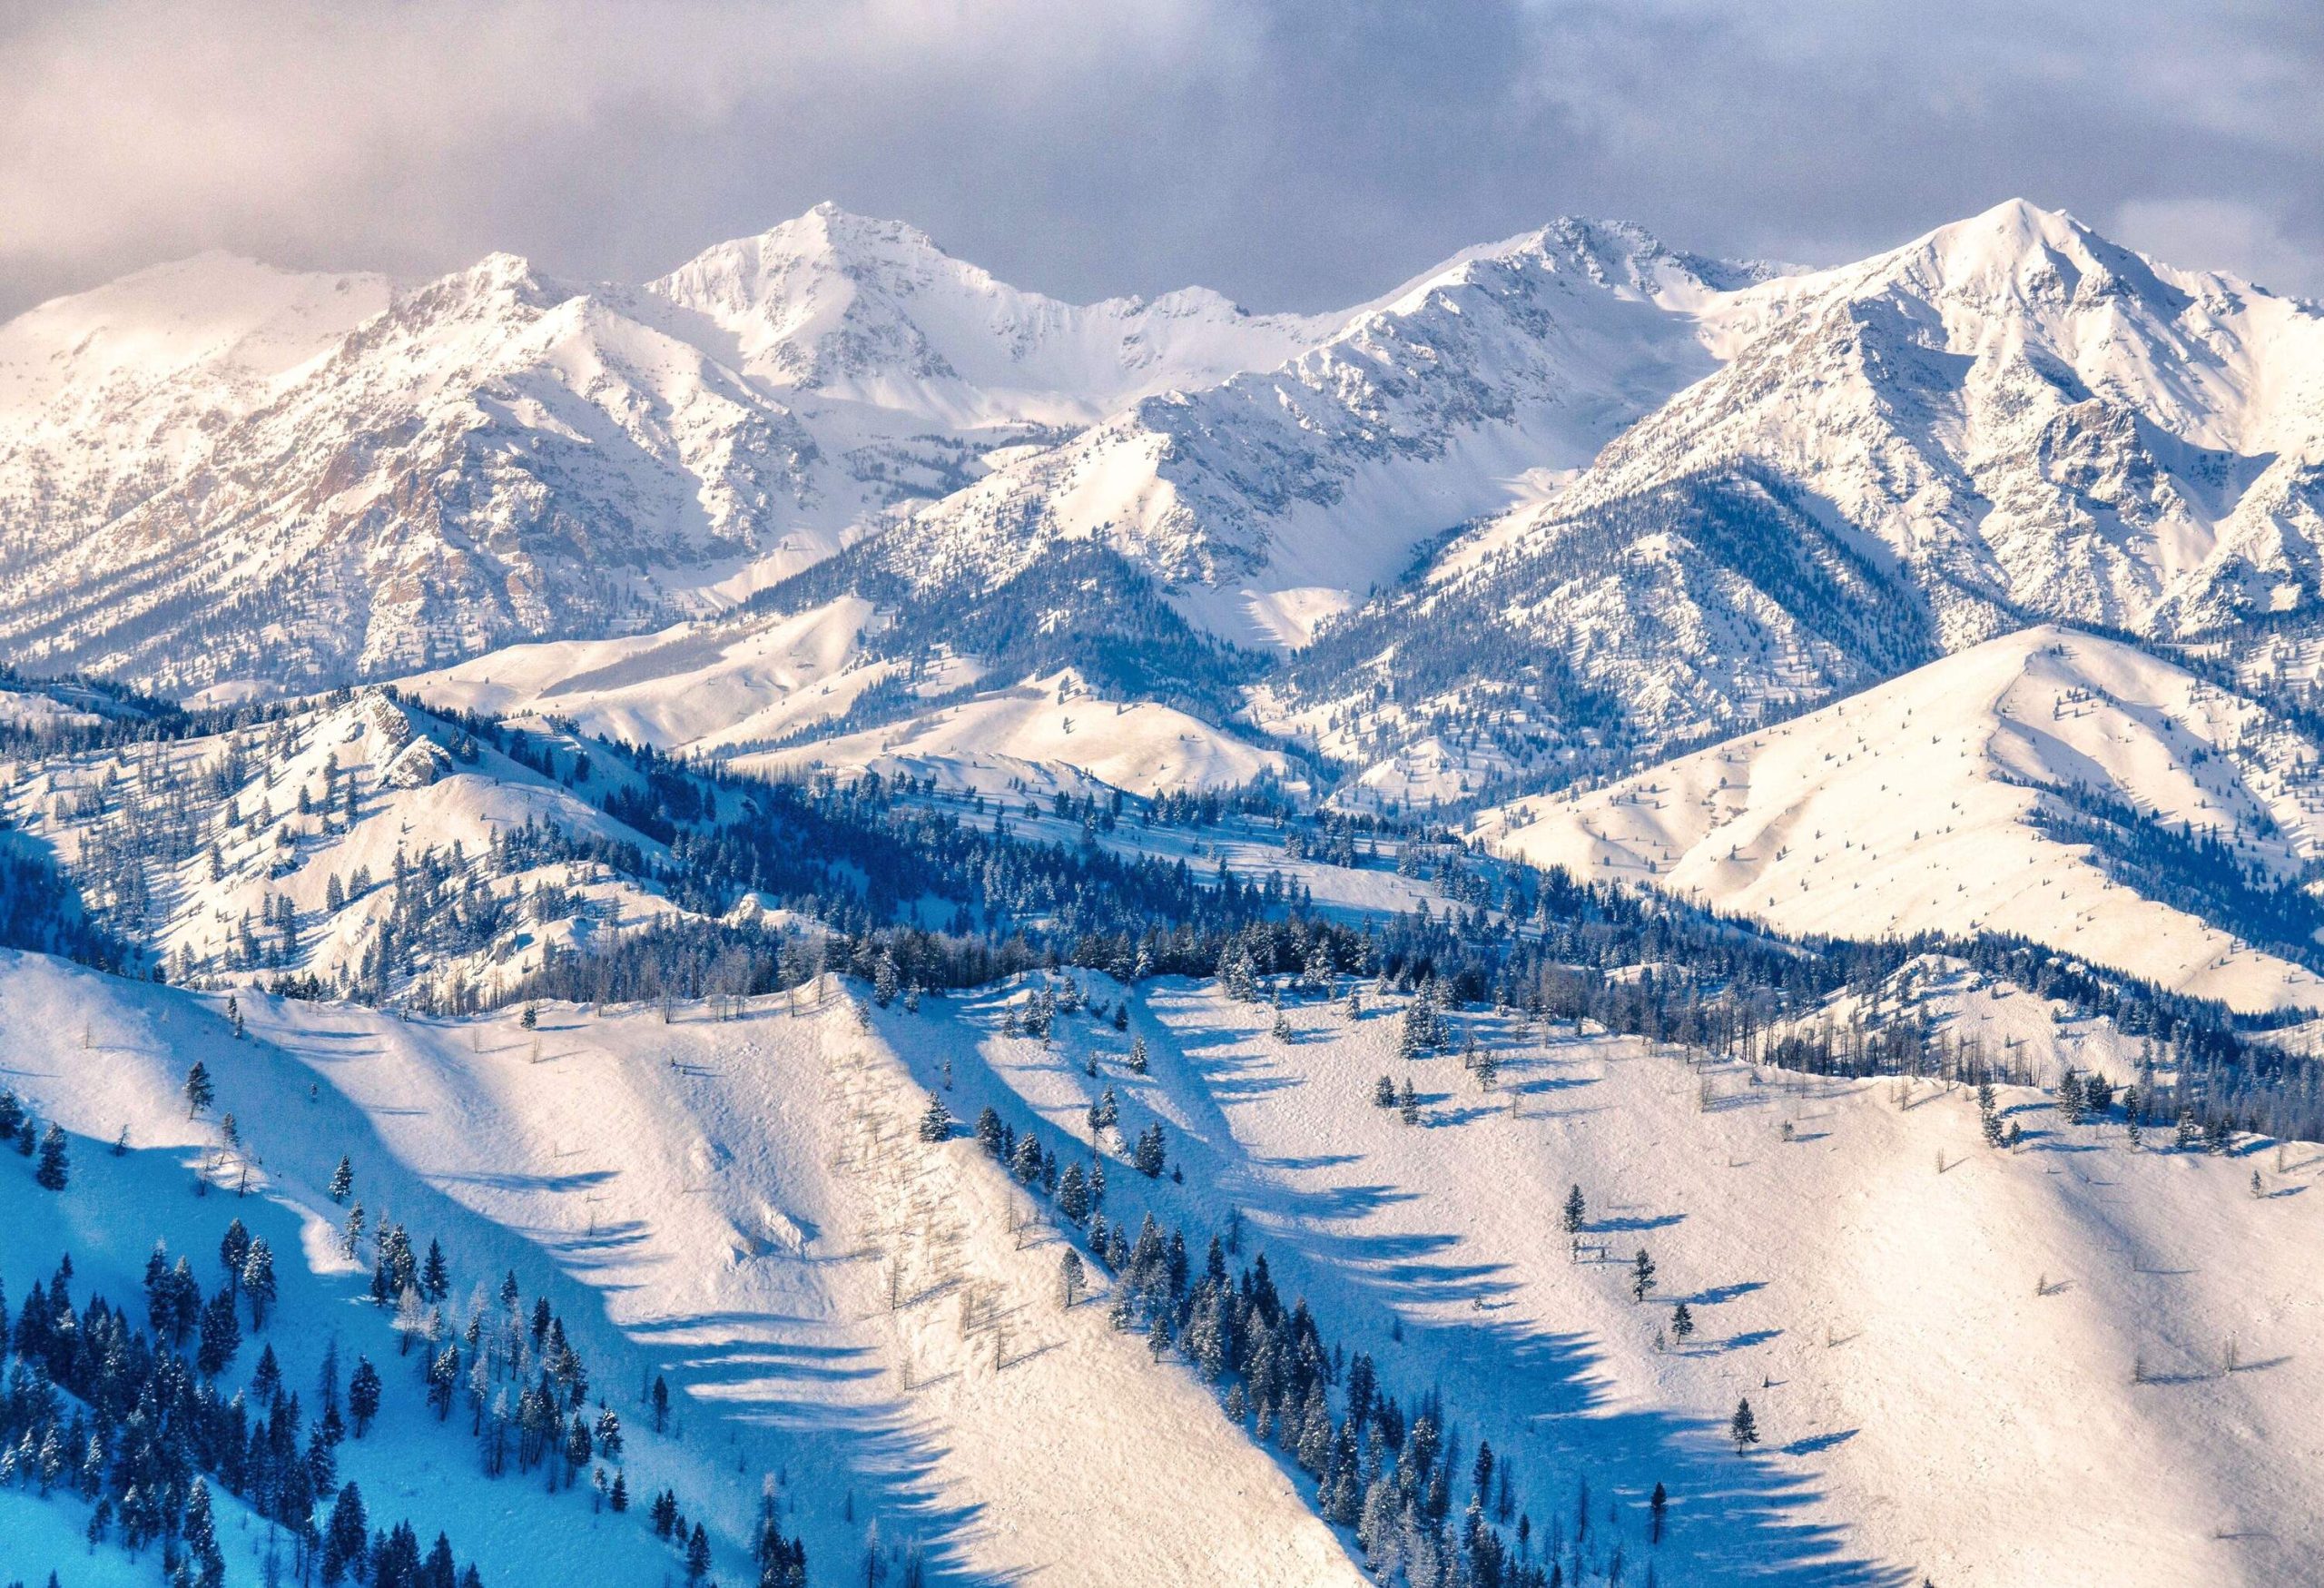 The landscape of sloppy ski terrain lined with frosted tall trees beneath the steep rocky mountains covered in deep snow.